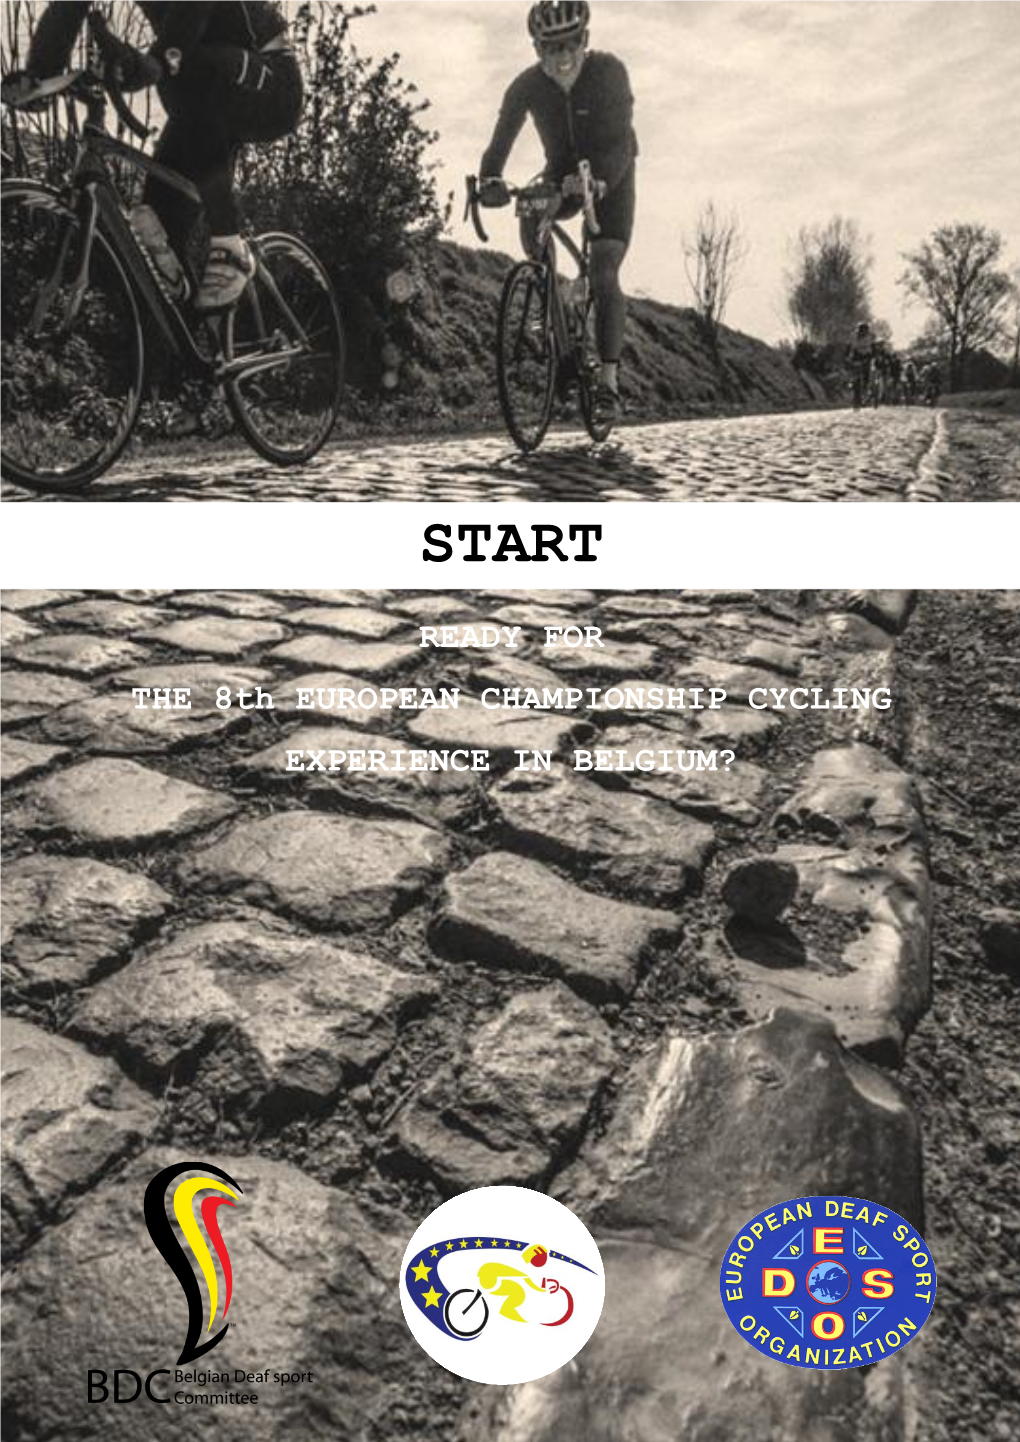 READY for the 8Th EUROPEAN CHAMPIONSHIP CYCLING EXPERIENCE in BELGIUM? 8Th European Deaf Cycling Championship